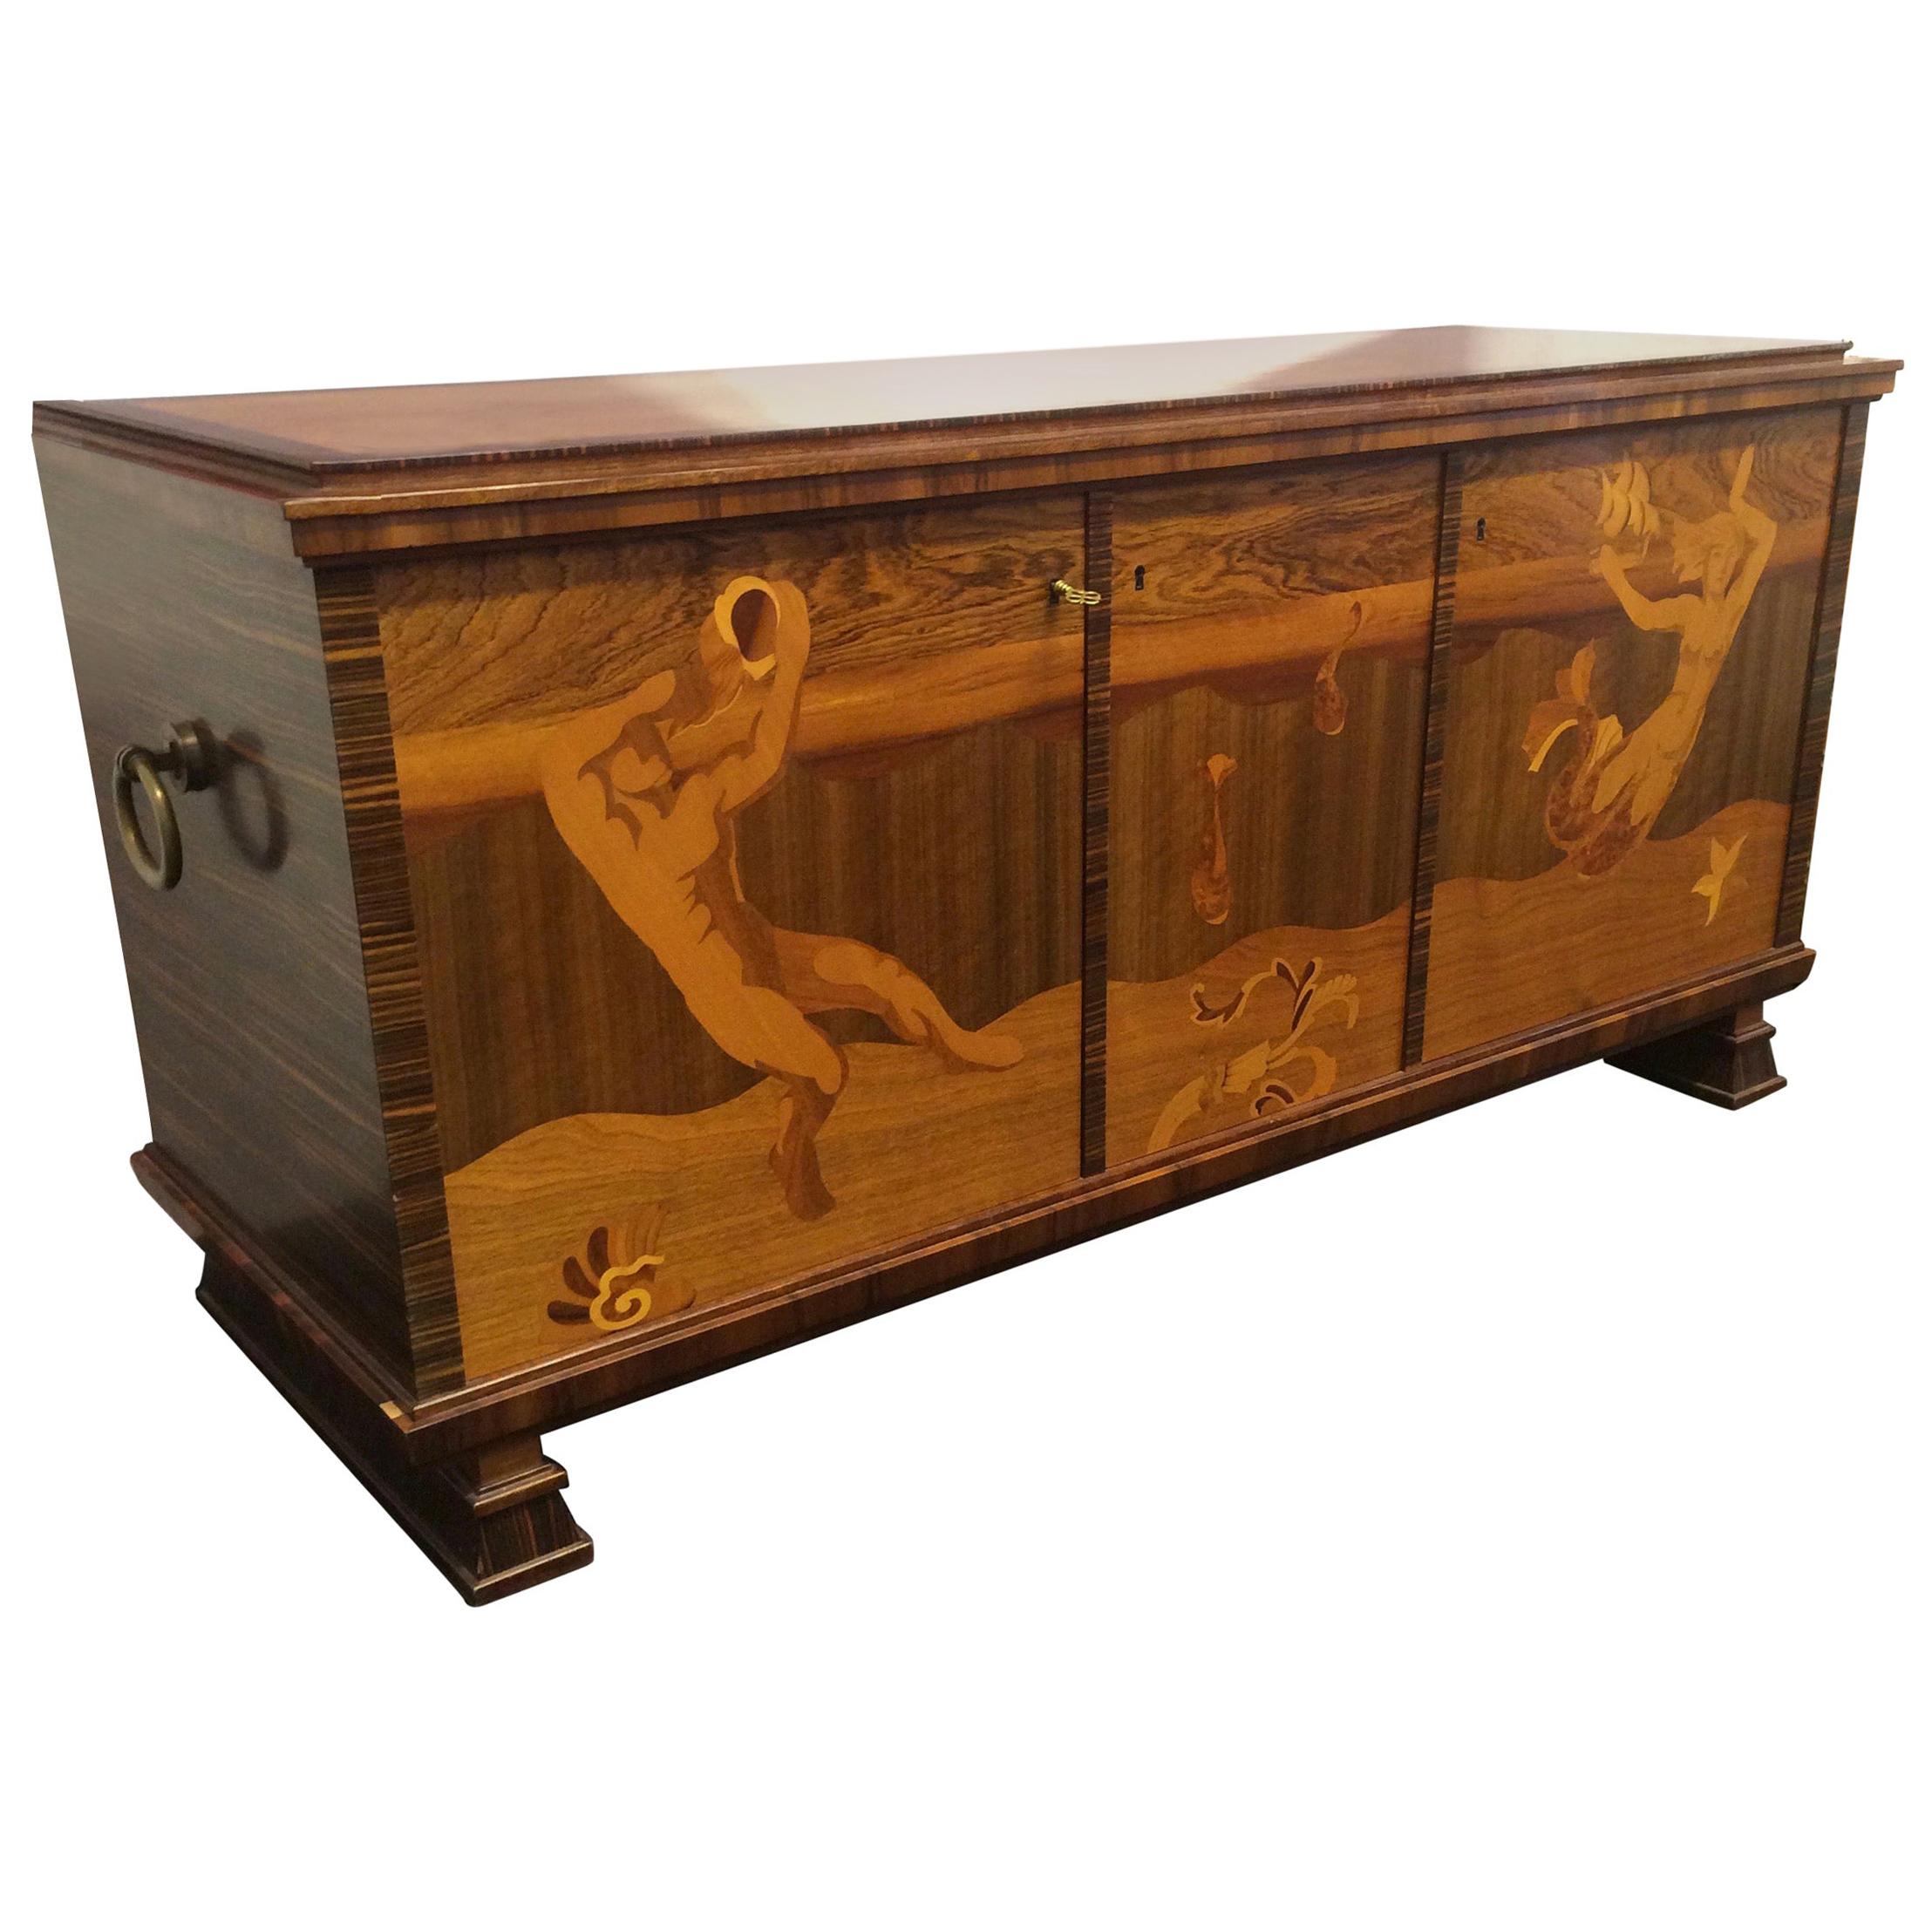 Swedish Grace - 1920s Art Deco Sideboard in the Manner of Carl Malmsten For Sale